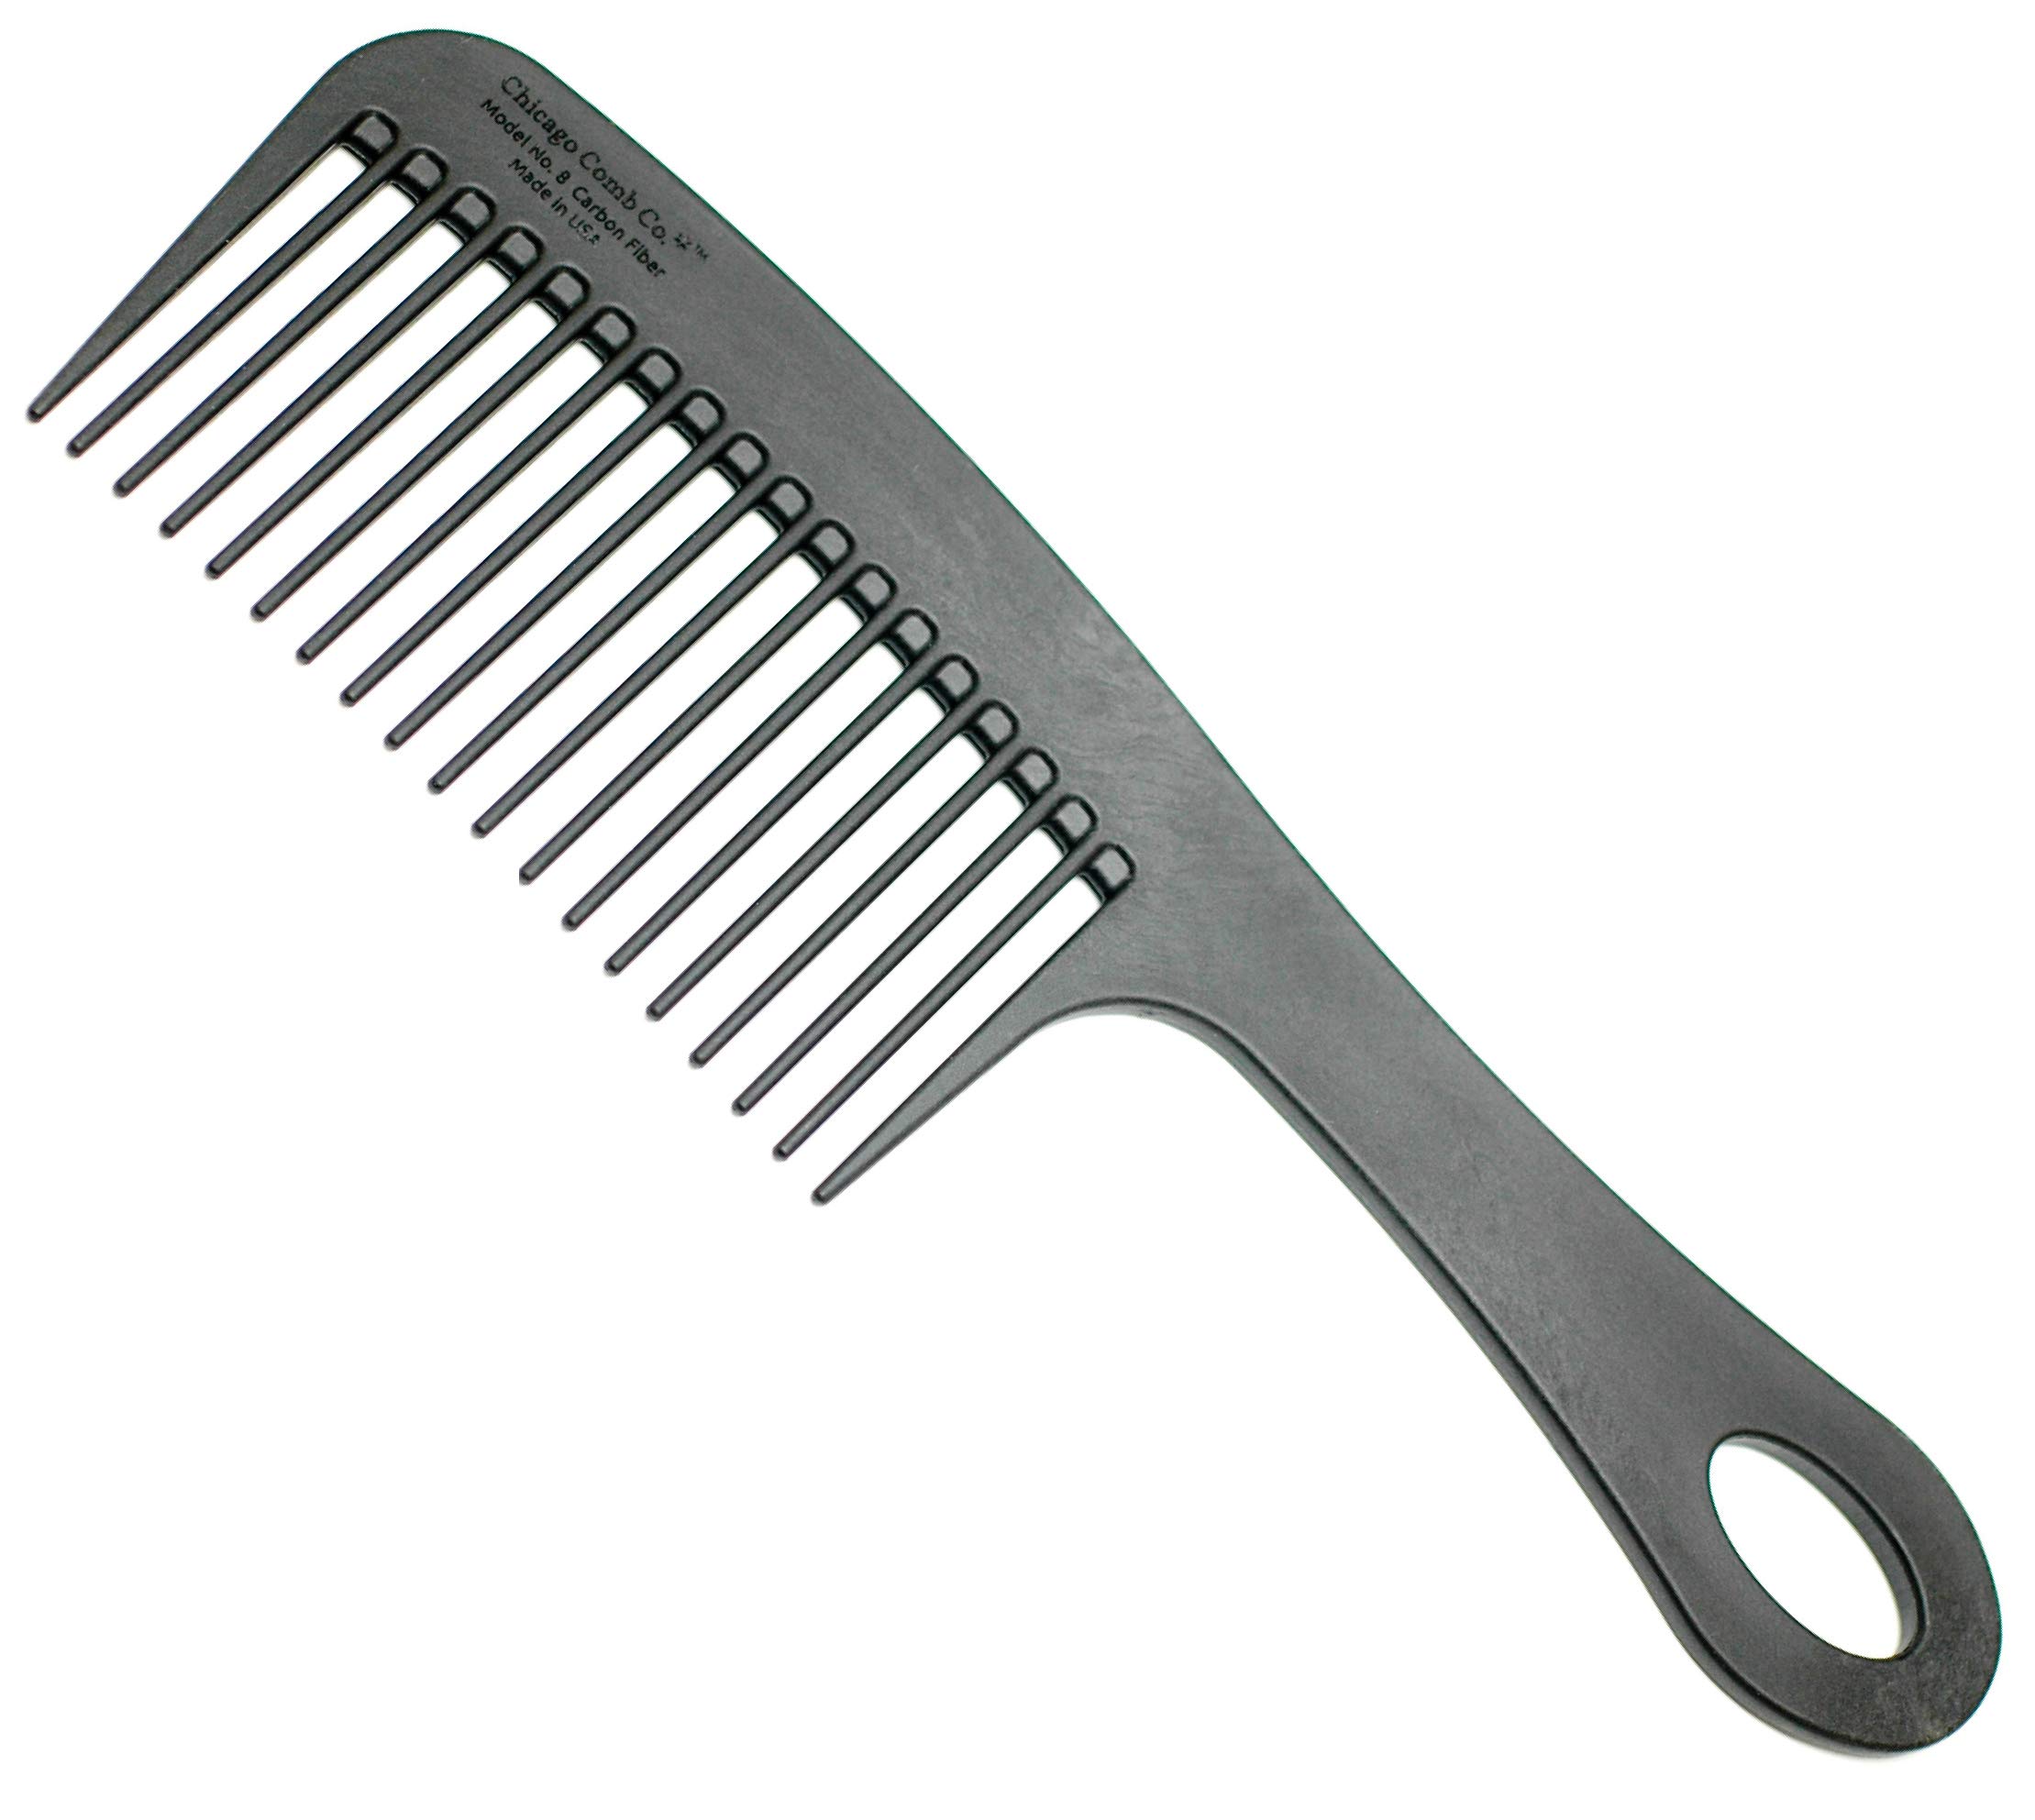 Chicago Comb Model 8 Carbon Fiber, Made in USA, Anti-static, Detangling & Shower comb, adds Lift & Volume, 8.5 inches (21.5 cm) long